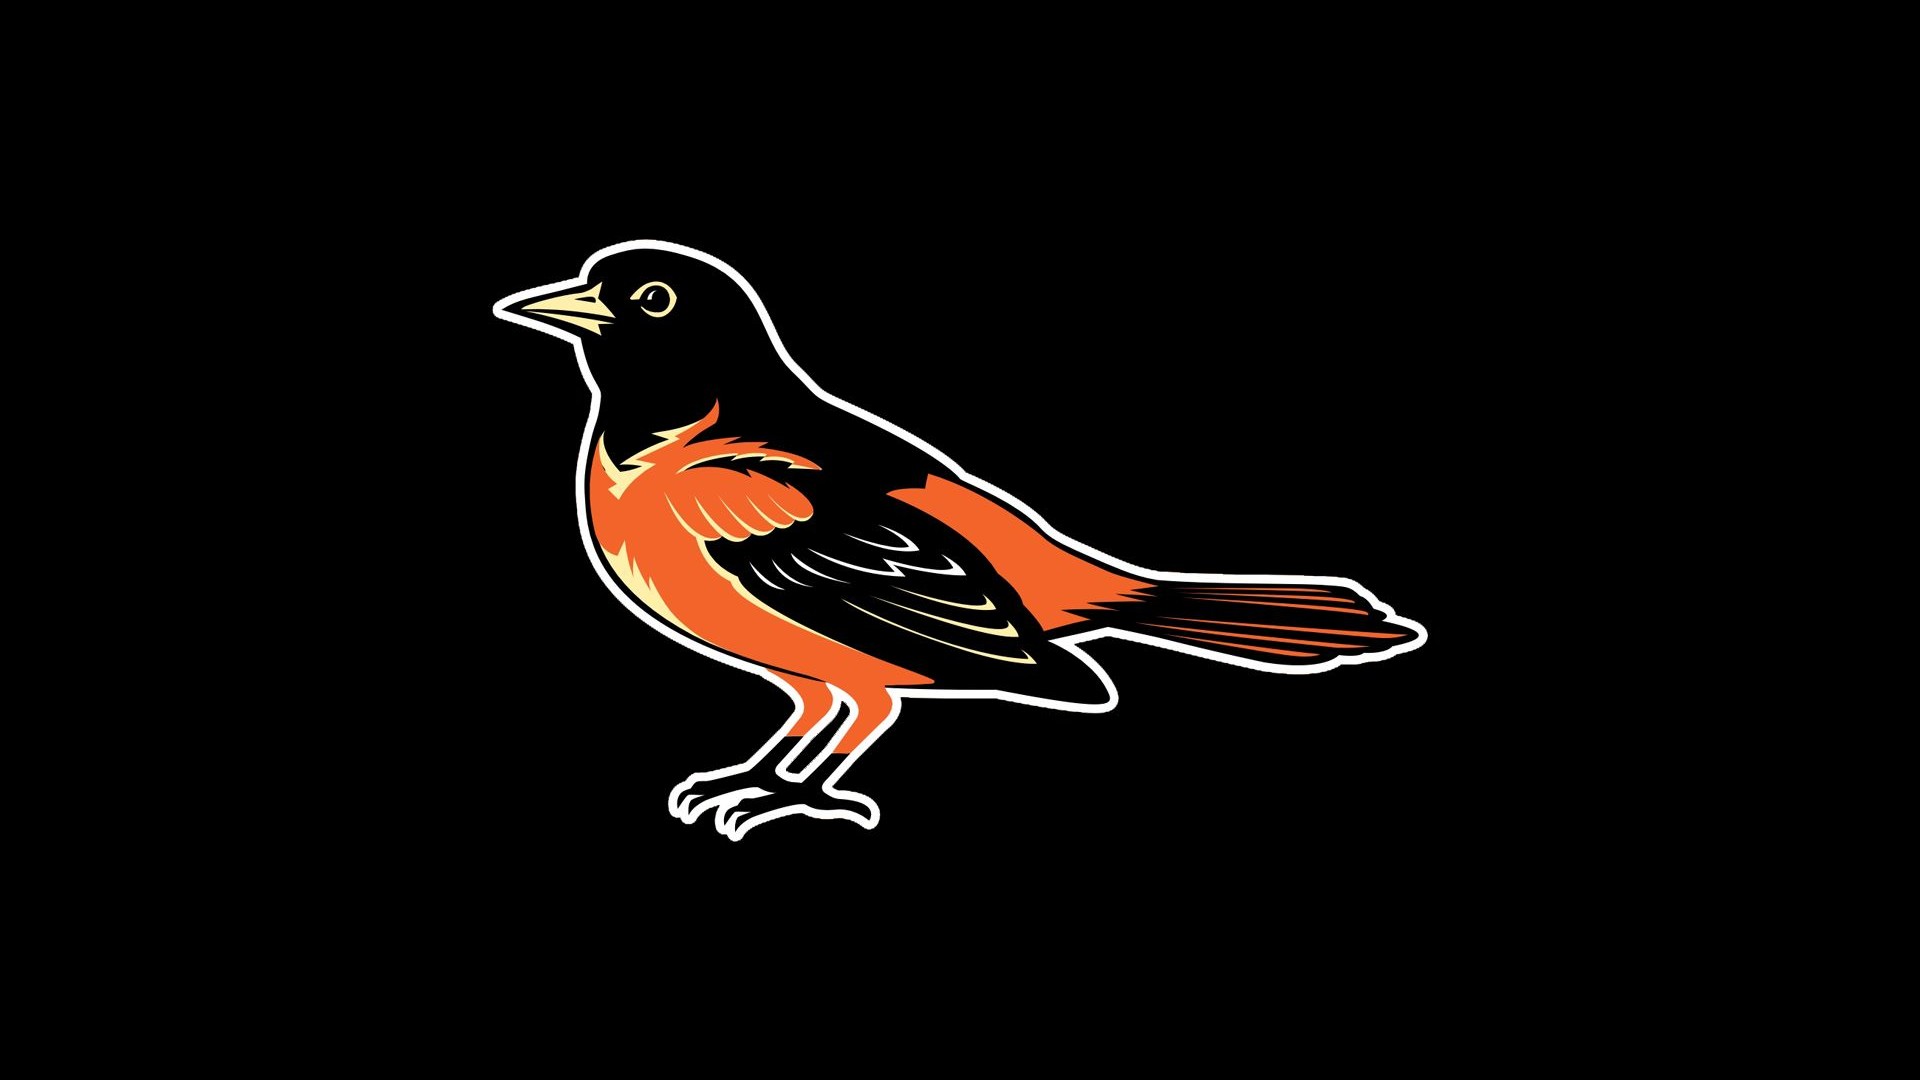 Wallpapers Baltimore Orioles with high-resolution 1920x1080 pixel. You can use this wallpaper for Mac Desktop Wallpaper, Laptop Screensavers, Android Wallpapers, Tablet or iPhone Home Screen and another mobile phone device